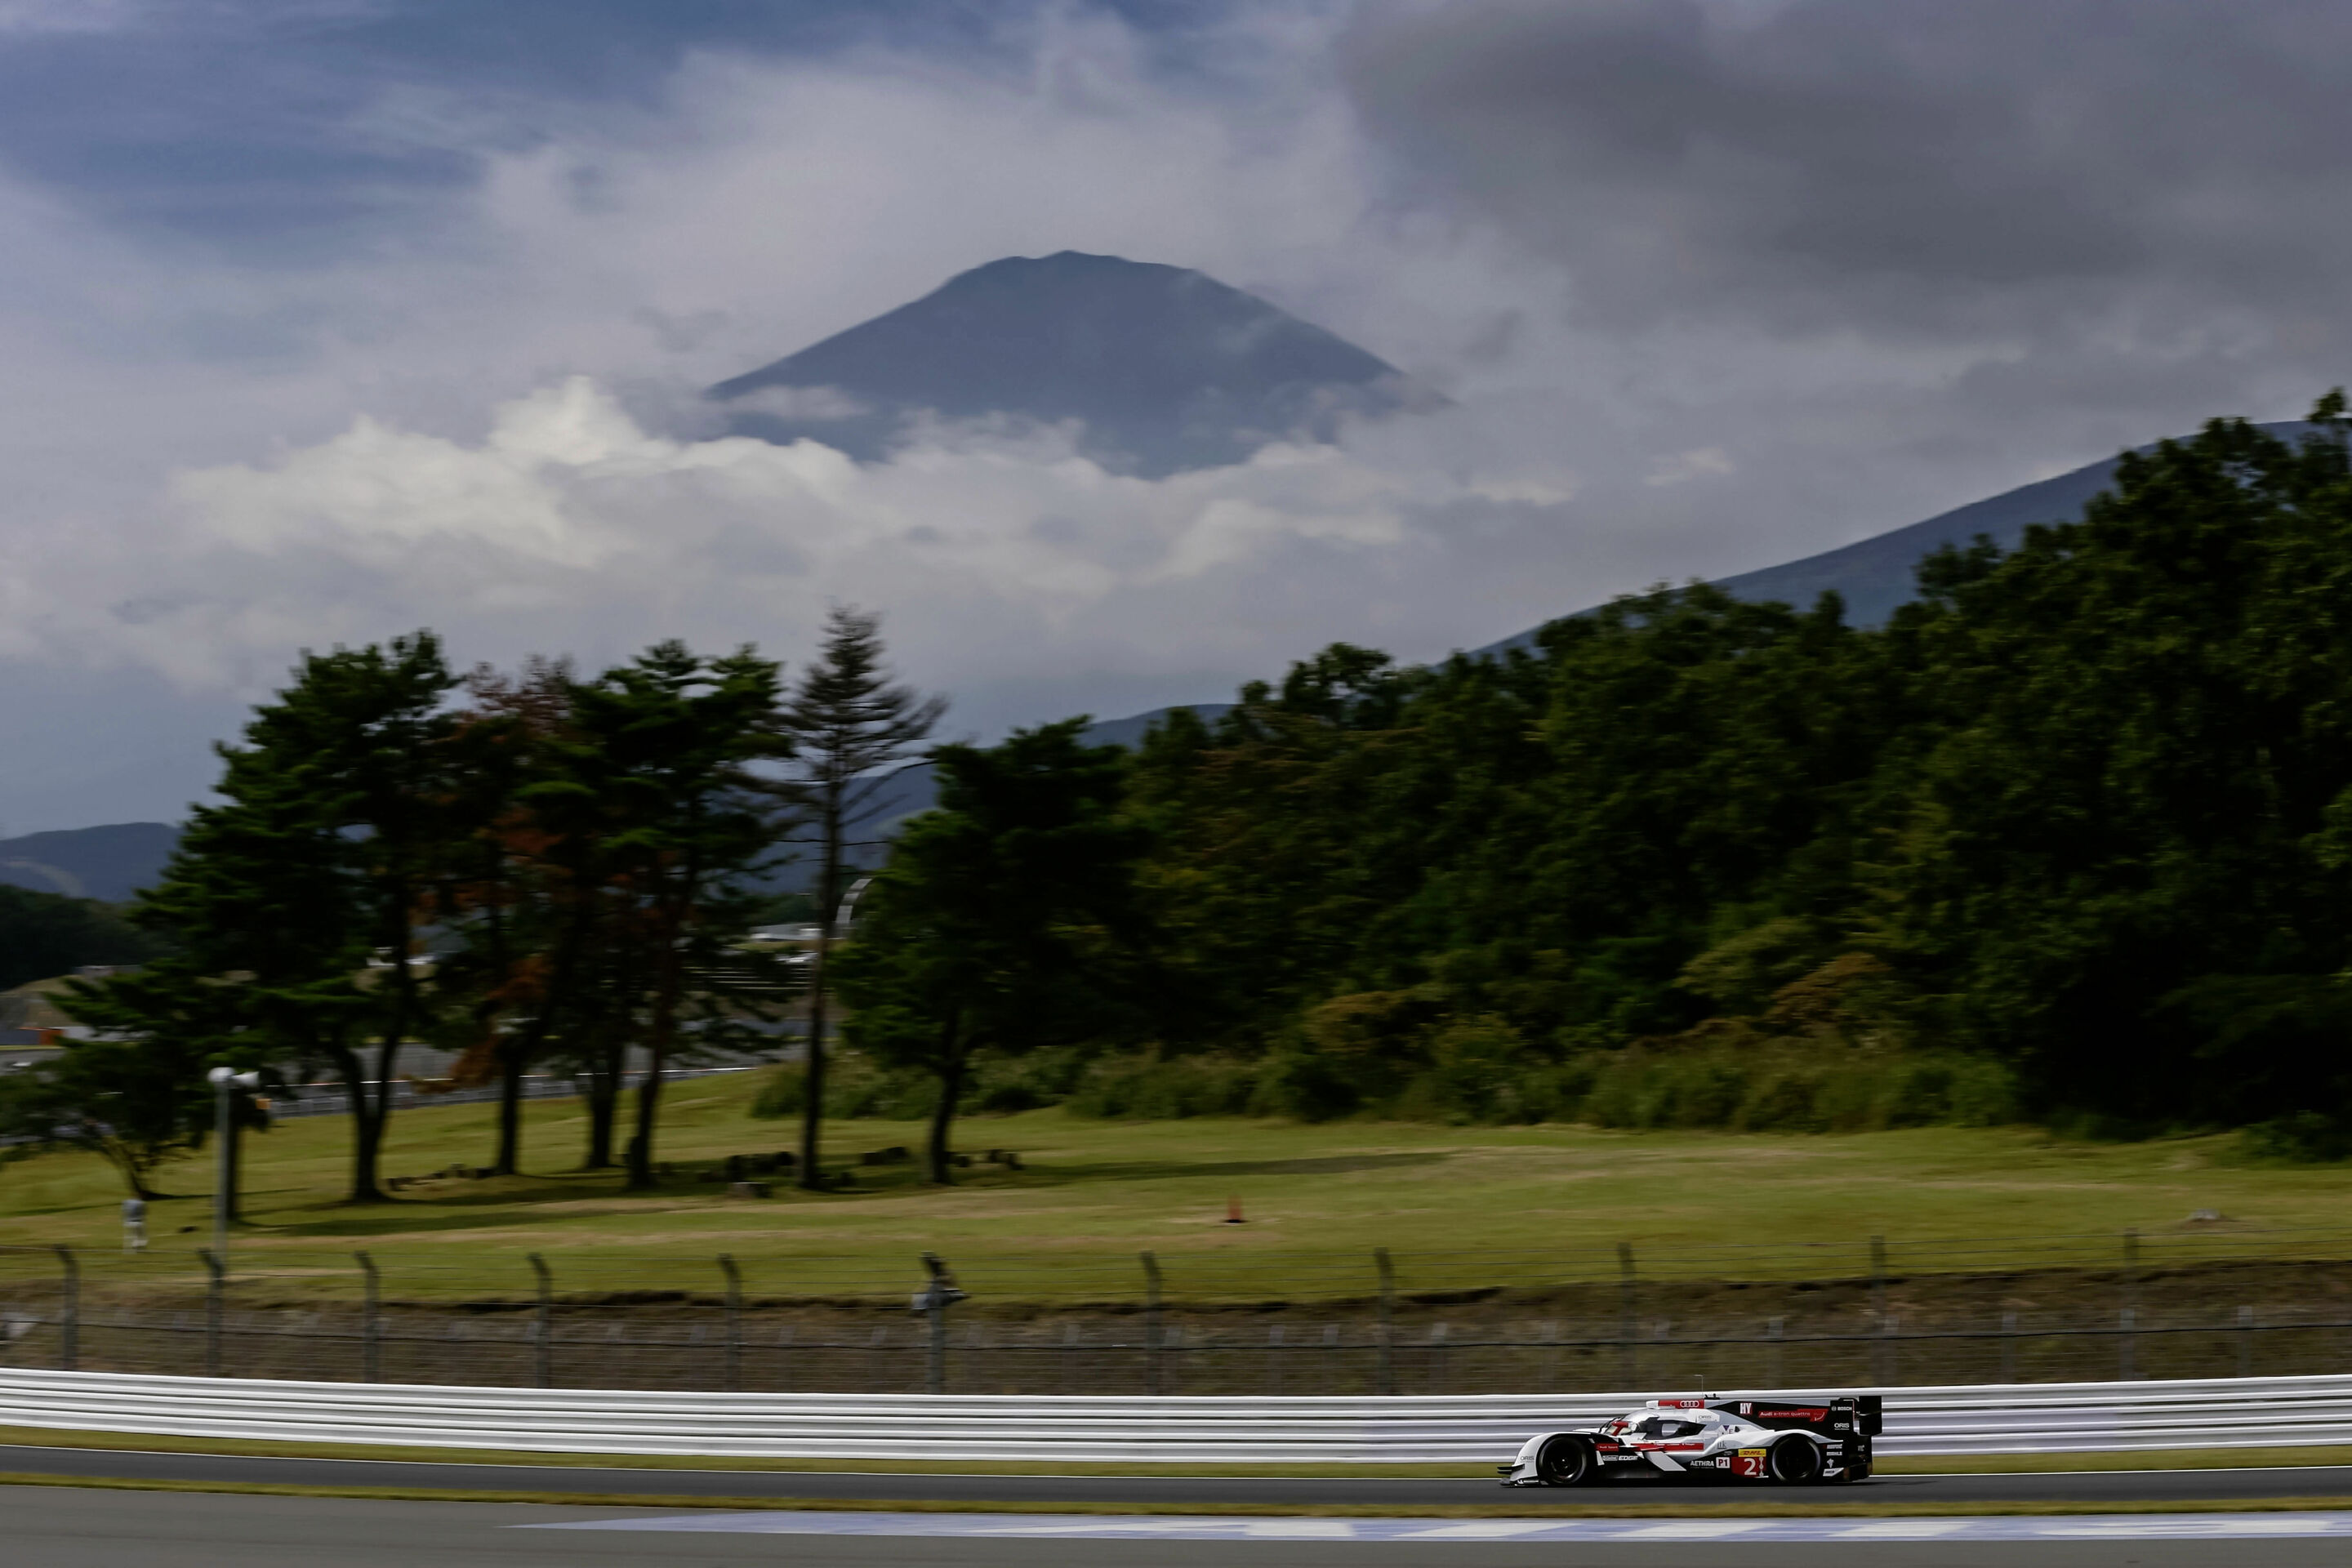 Audi will start from third row in Japan